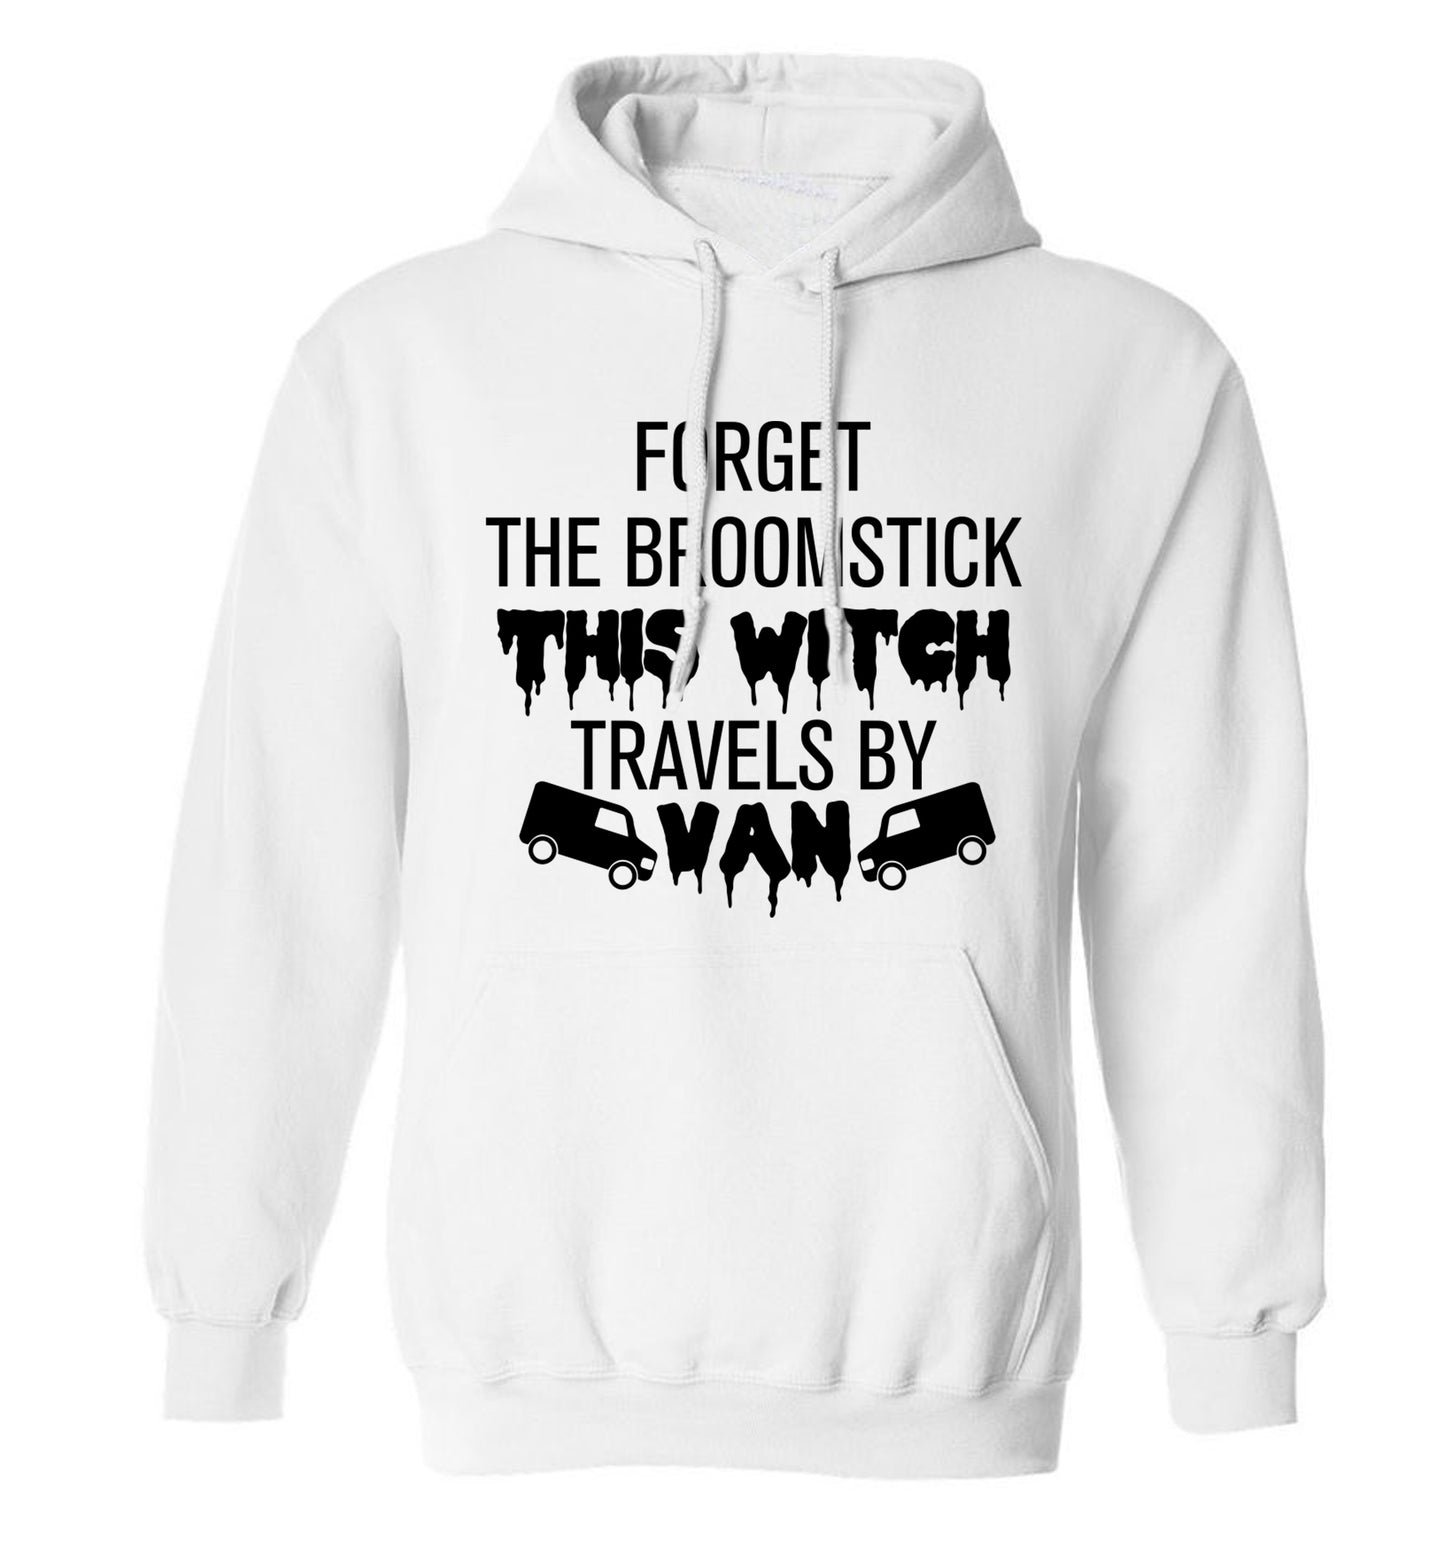 Forget the broomstick this witch travels by van adults unisexwhite hoodie 2XL